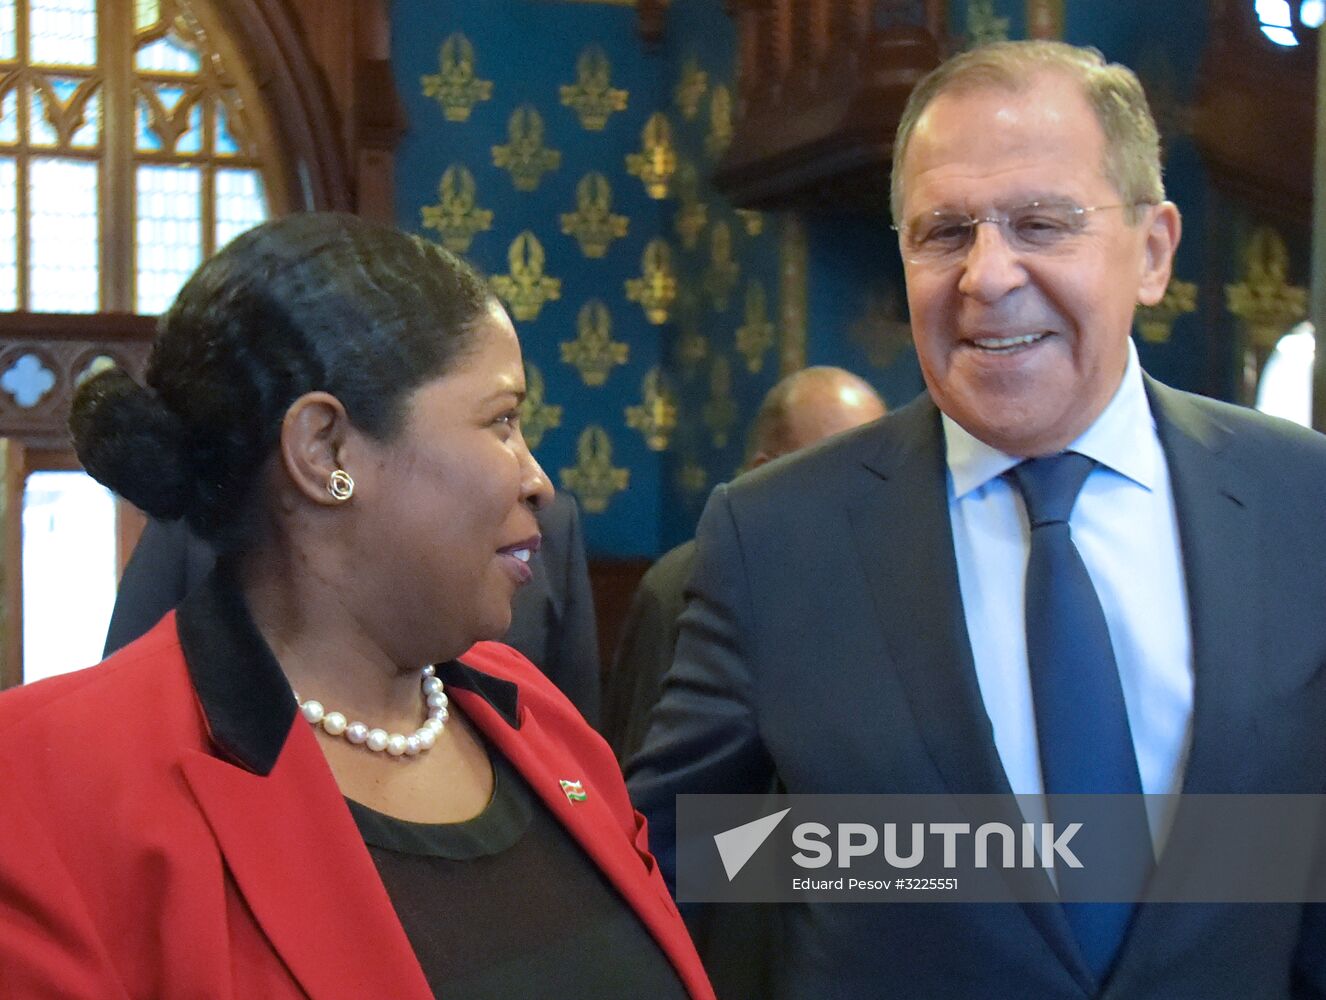 Russian Foreign Minister Sergei Lavrov meets with Foreign Minister of Suriname Yldiz Deborah Pollack-Beighle